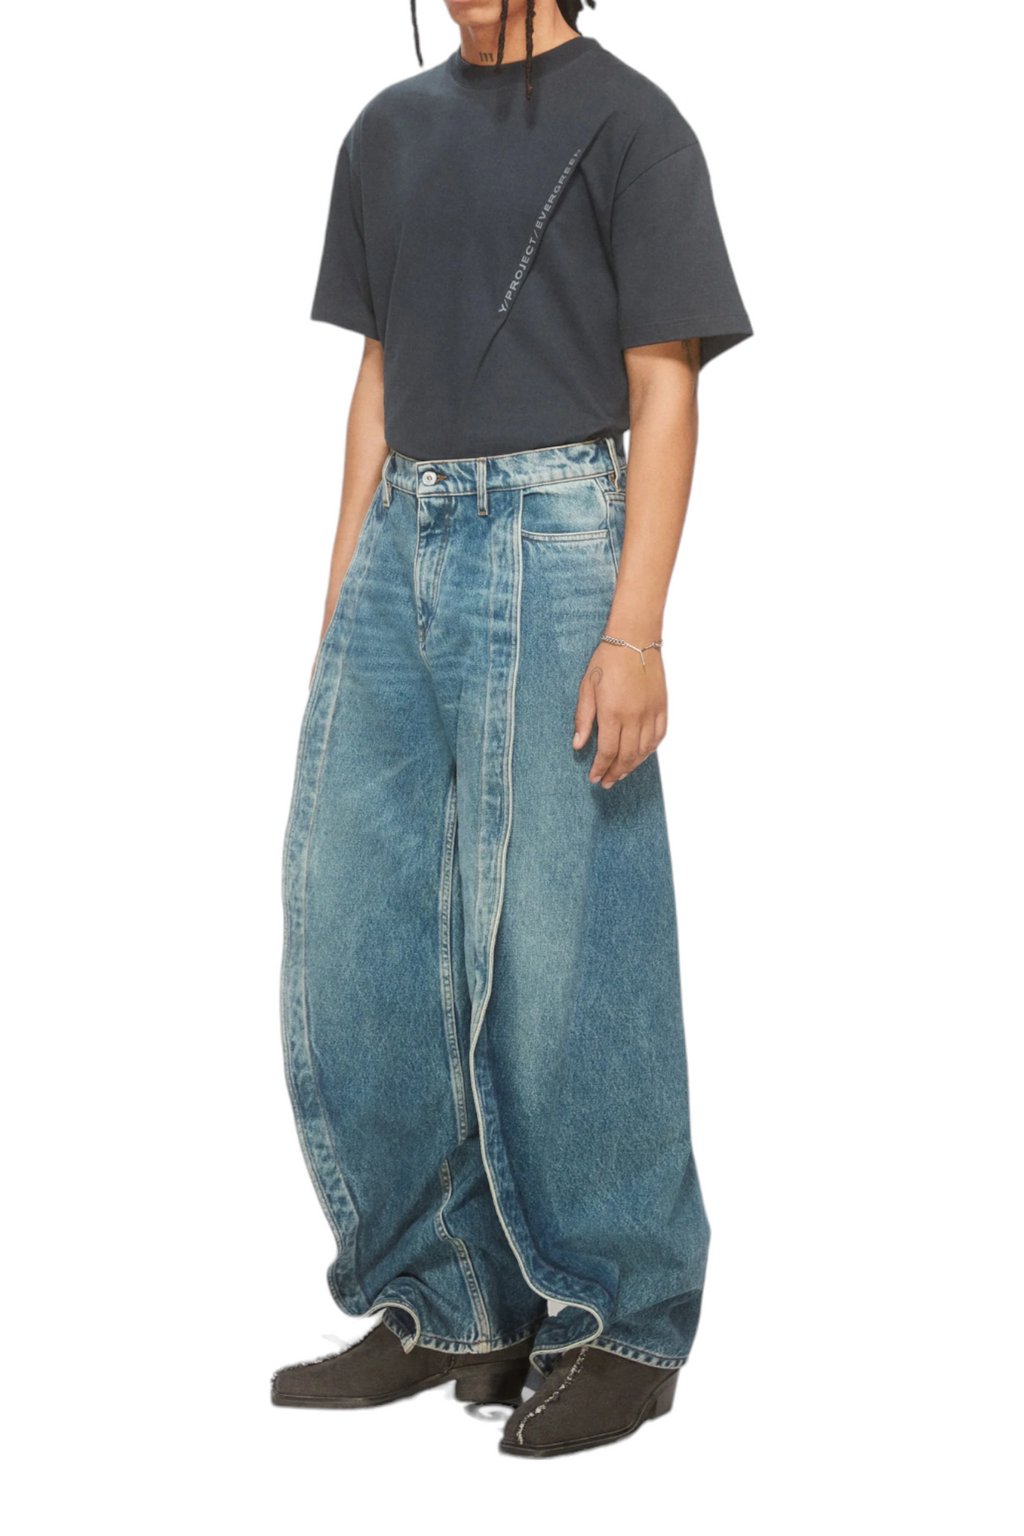 Y/Project Evergreen Banana Jeans